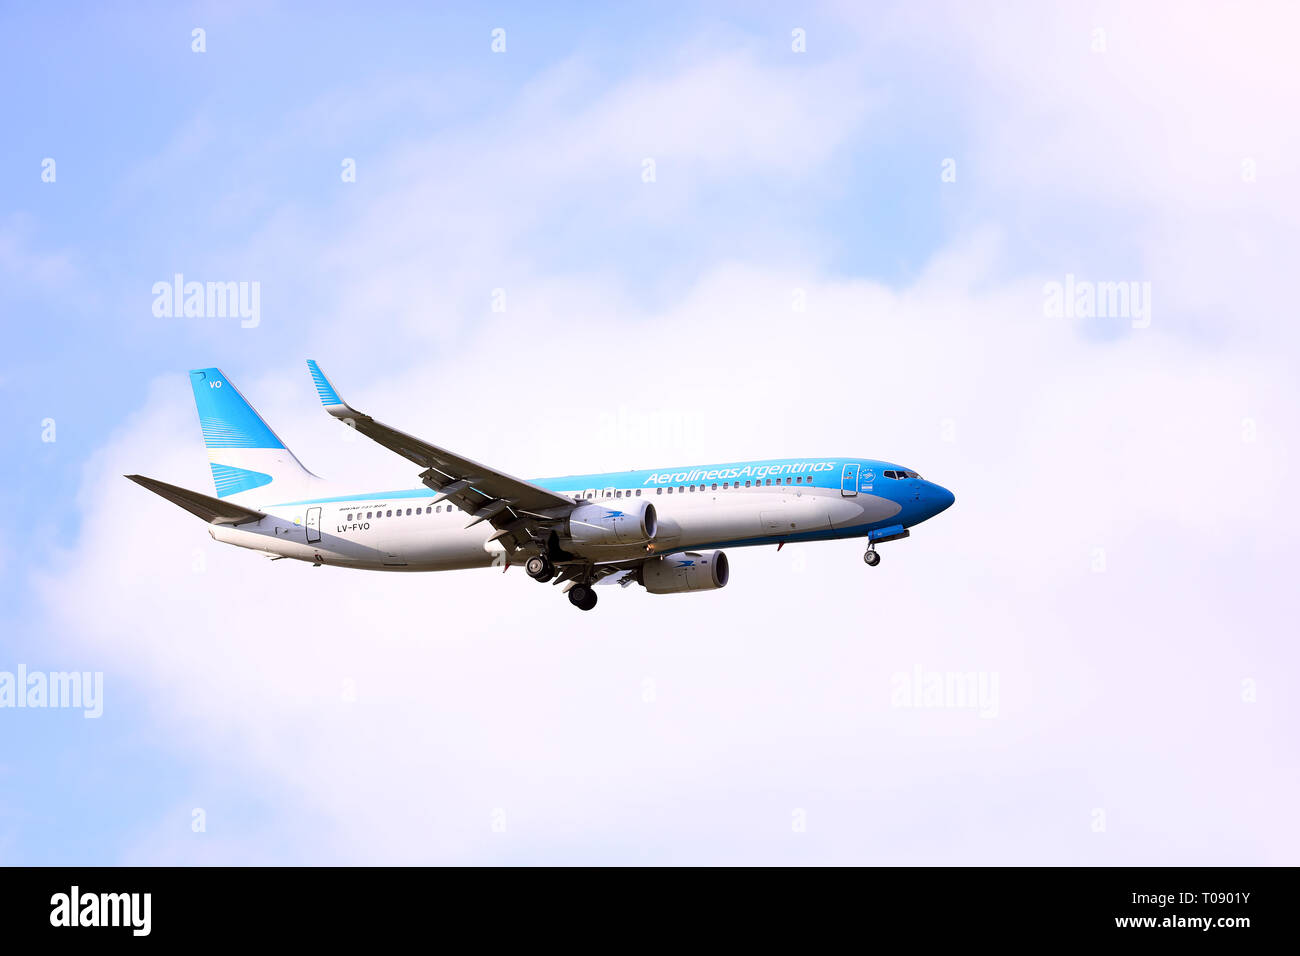 Buenos Aires, Argentina - March 18, 2019: Aerolineas Argentinas plane flying over Buenos Aires in Capital Federal, Buenos Aires, Argentina Stock Photo